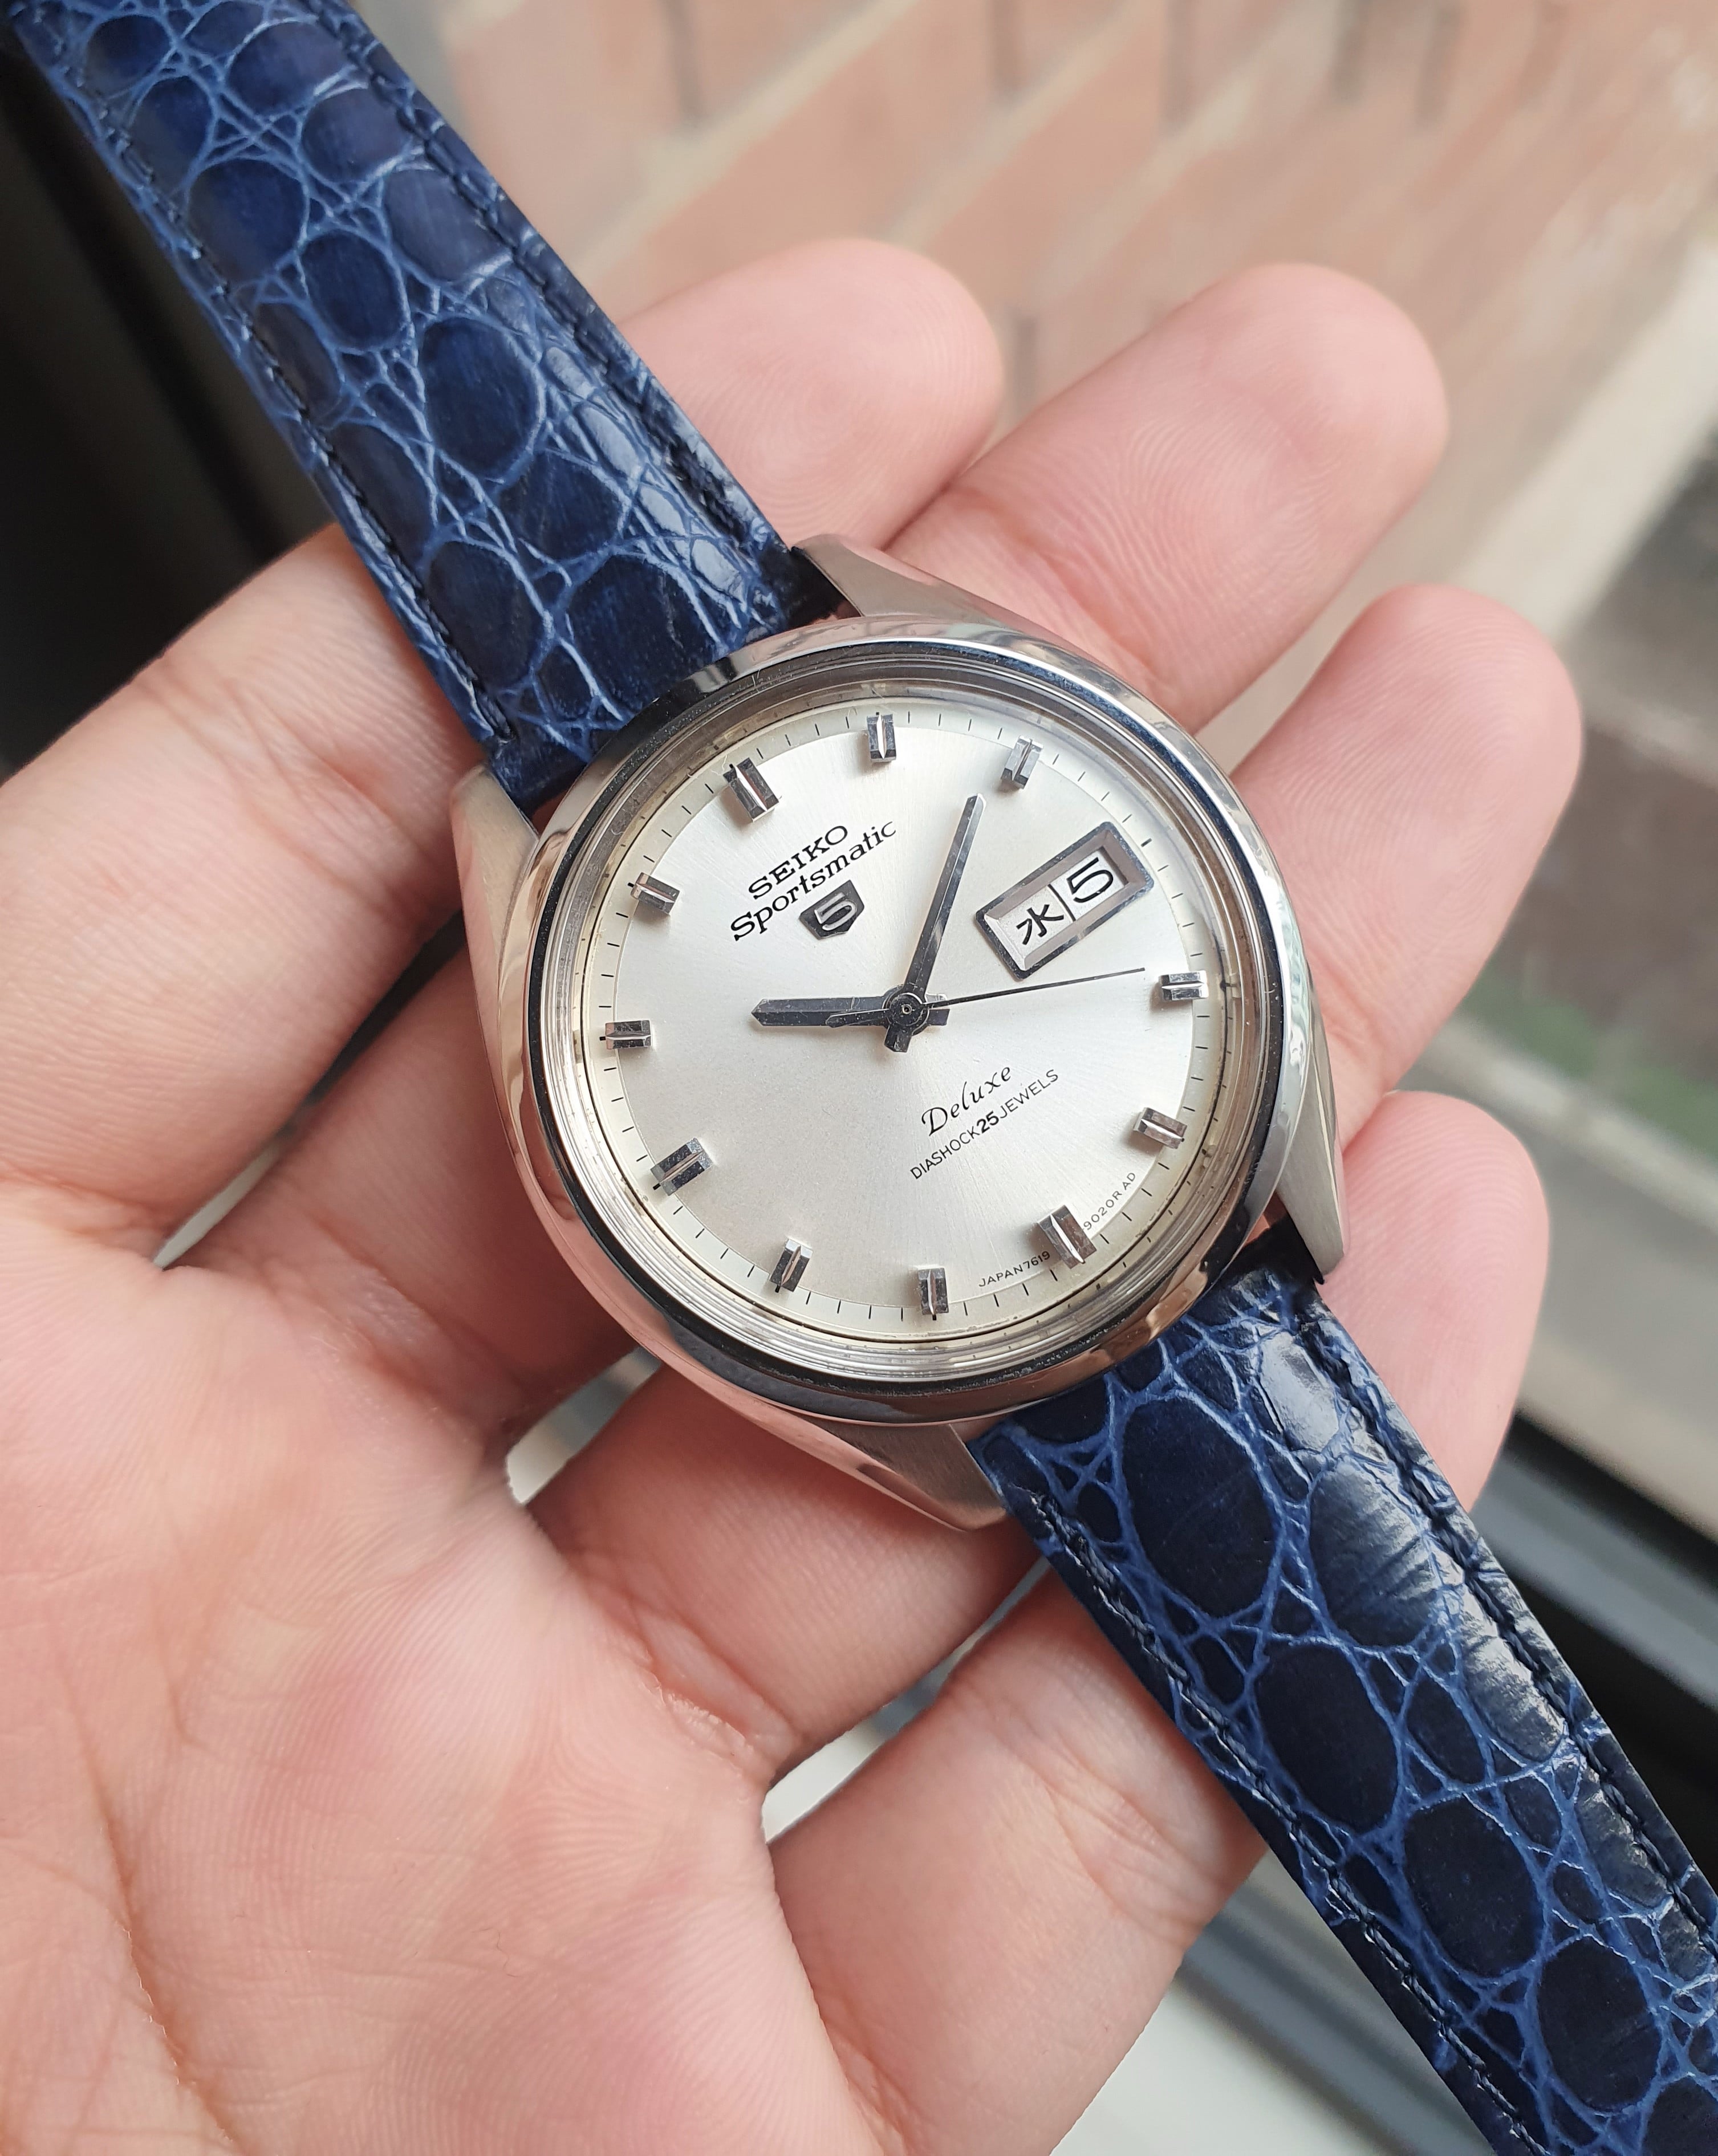 WTS] Seiko Sportsmatic Deluxe 1967 Jumbo SERVICED Rare Vintage